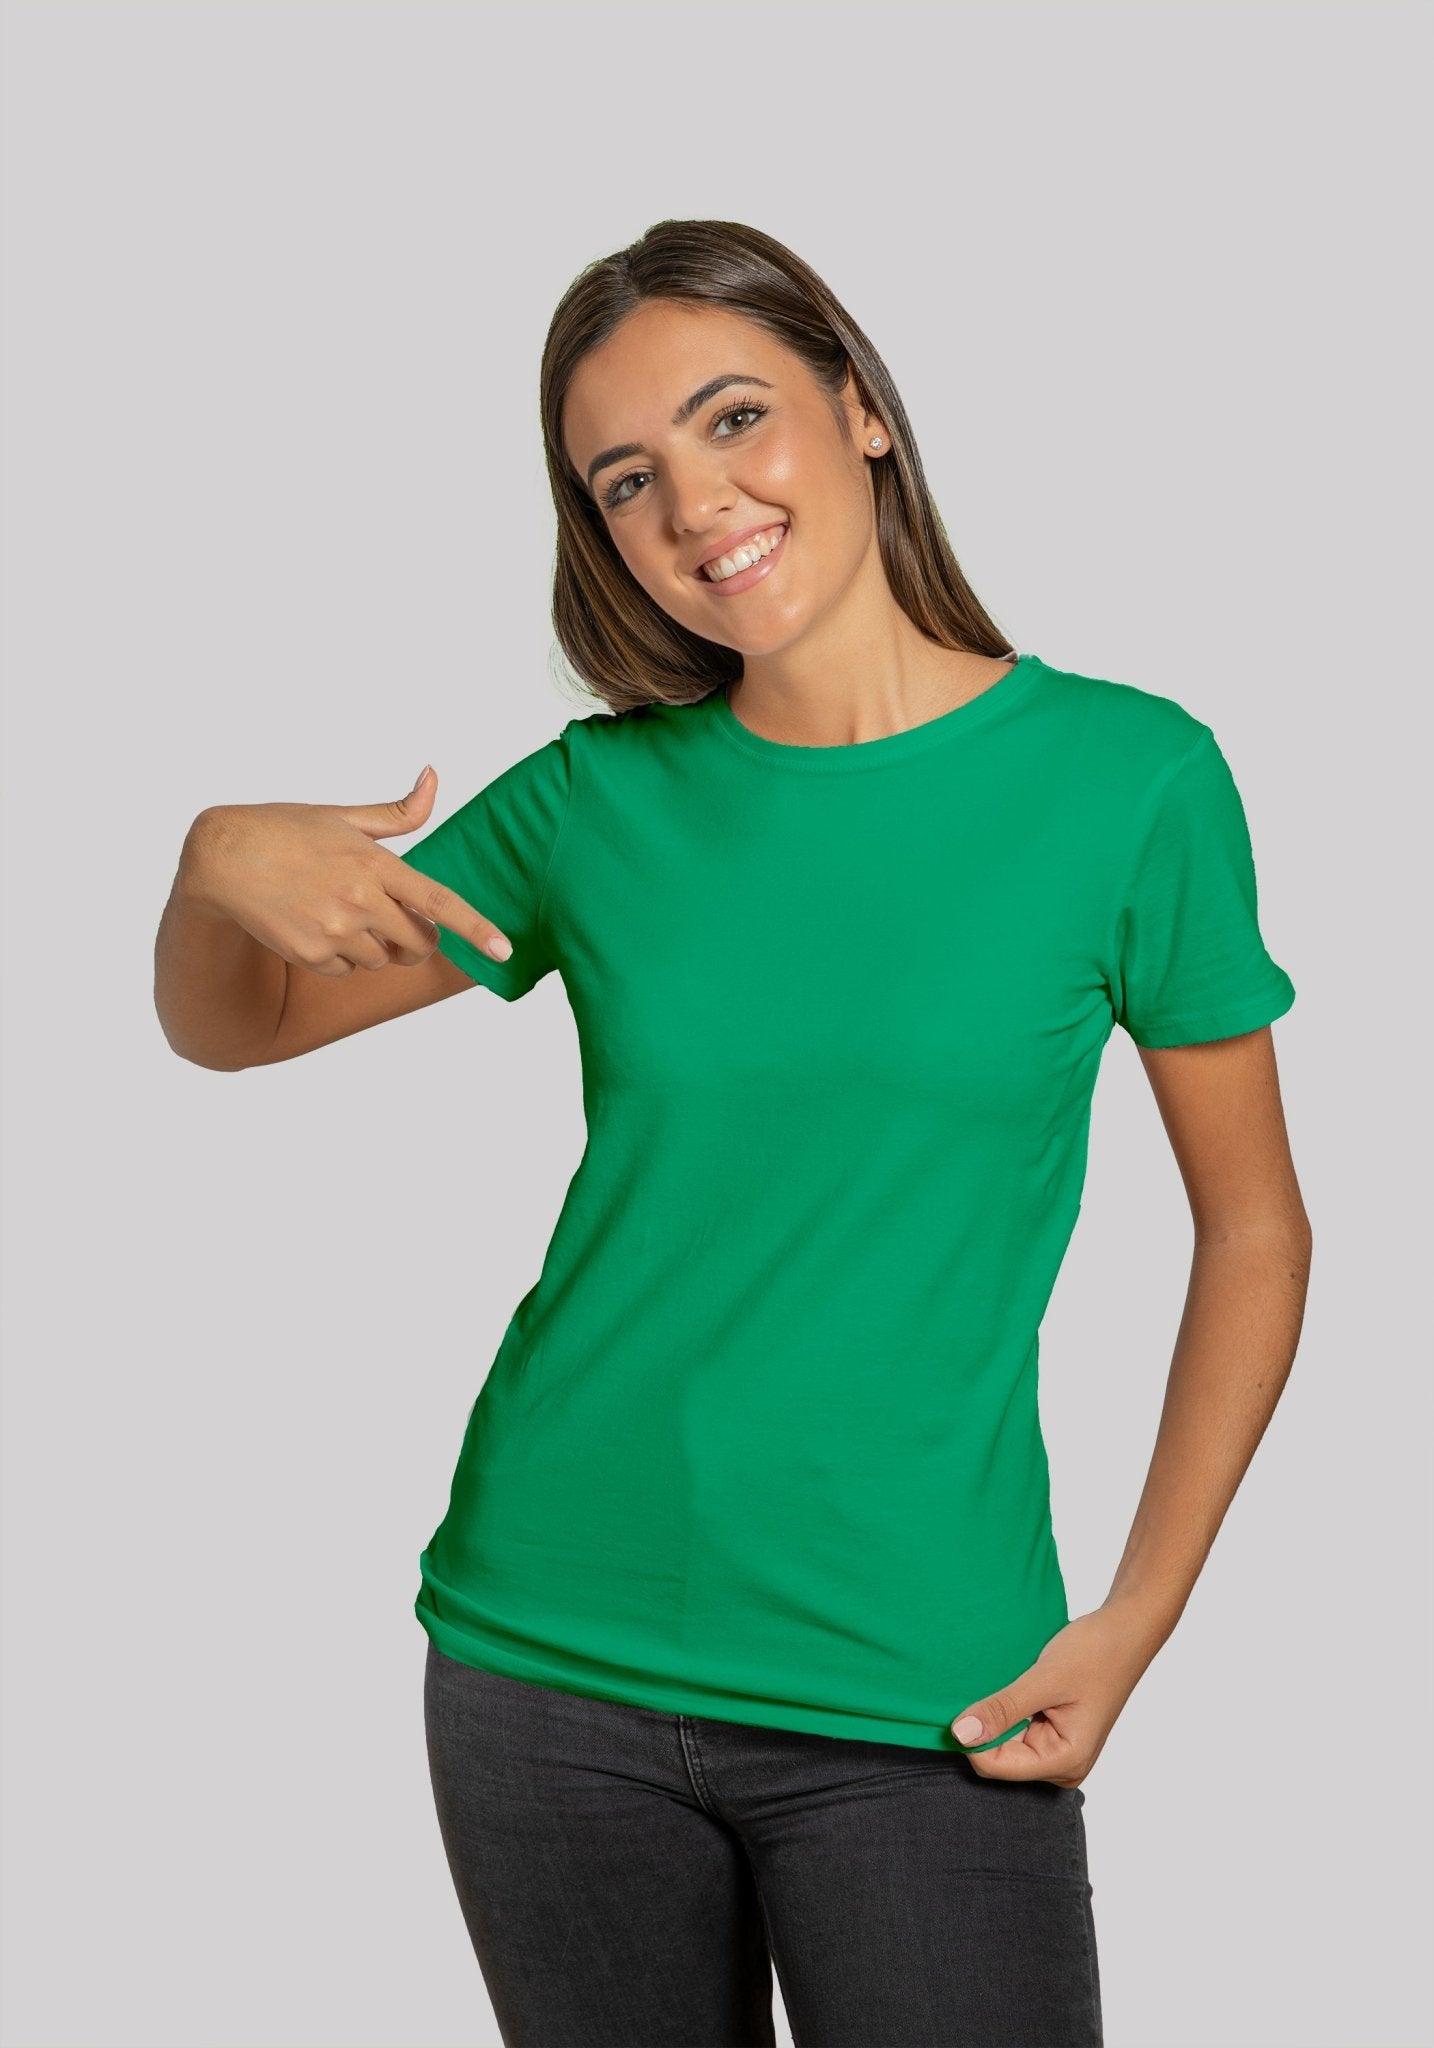 Solid Plain T Shirt Combo For Women In Green Colour Variant